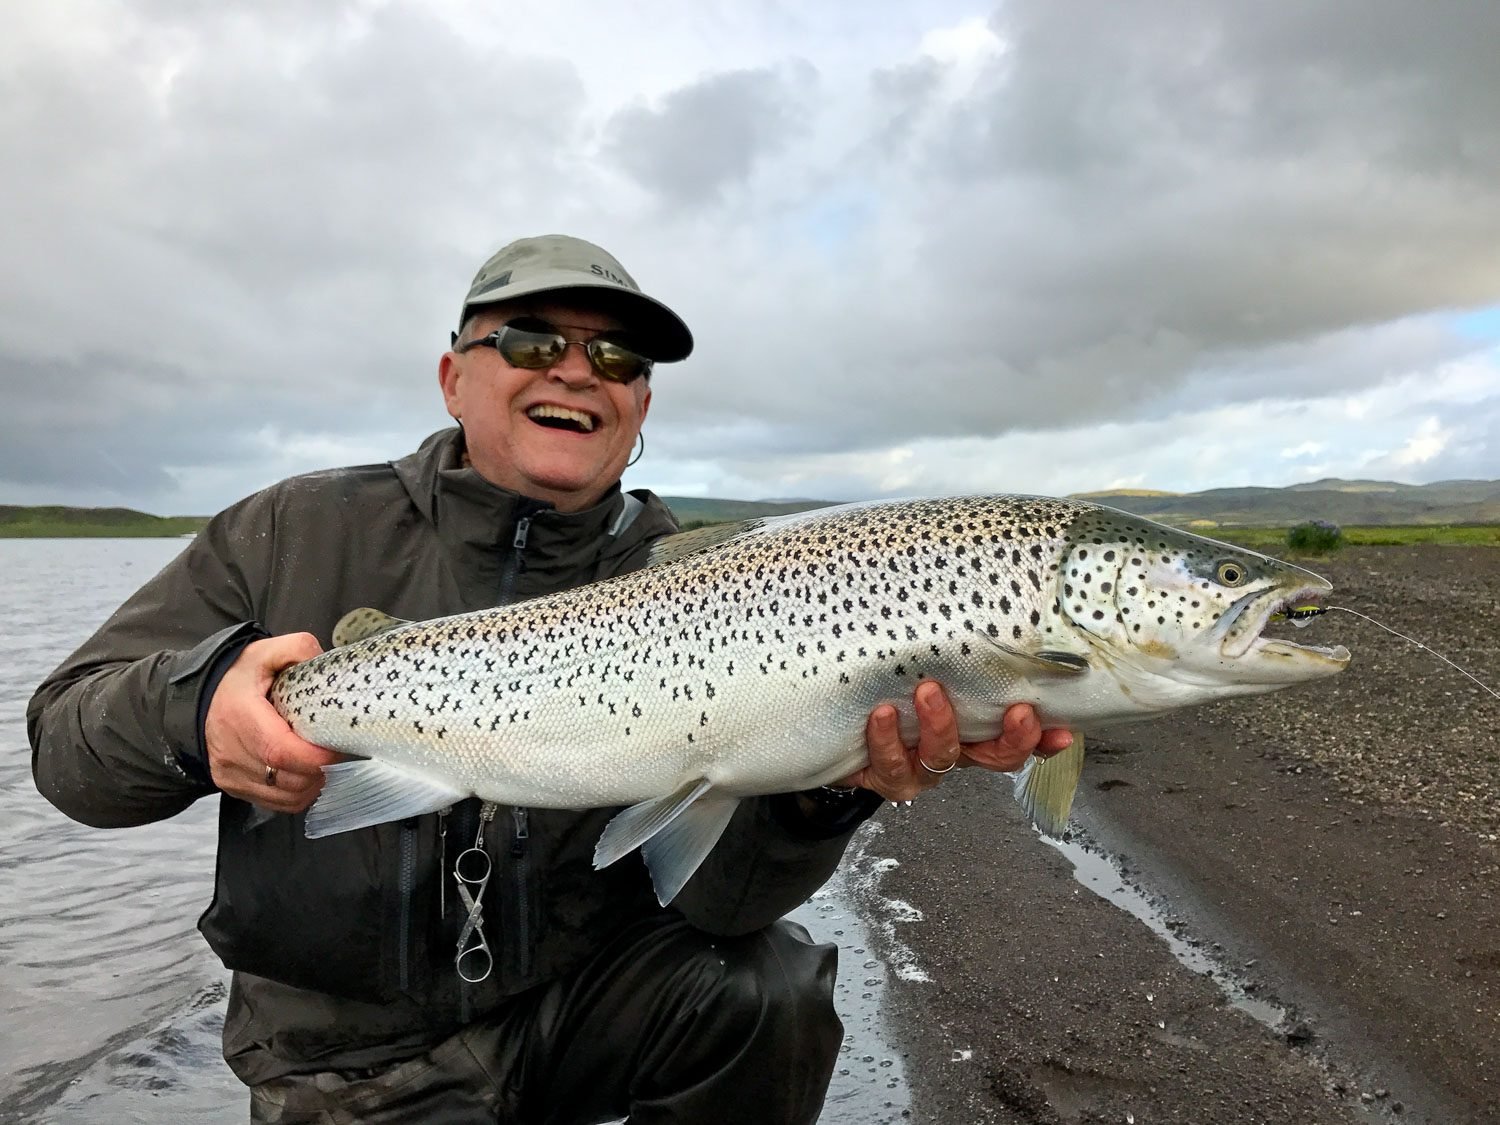 There's nothing quite like fly fishing in Iceland, especially for Arctic Char at Lake Thingvellir